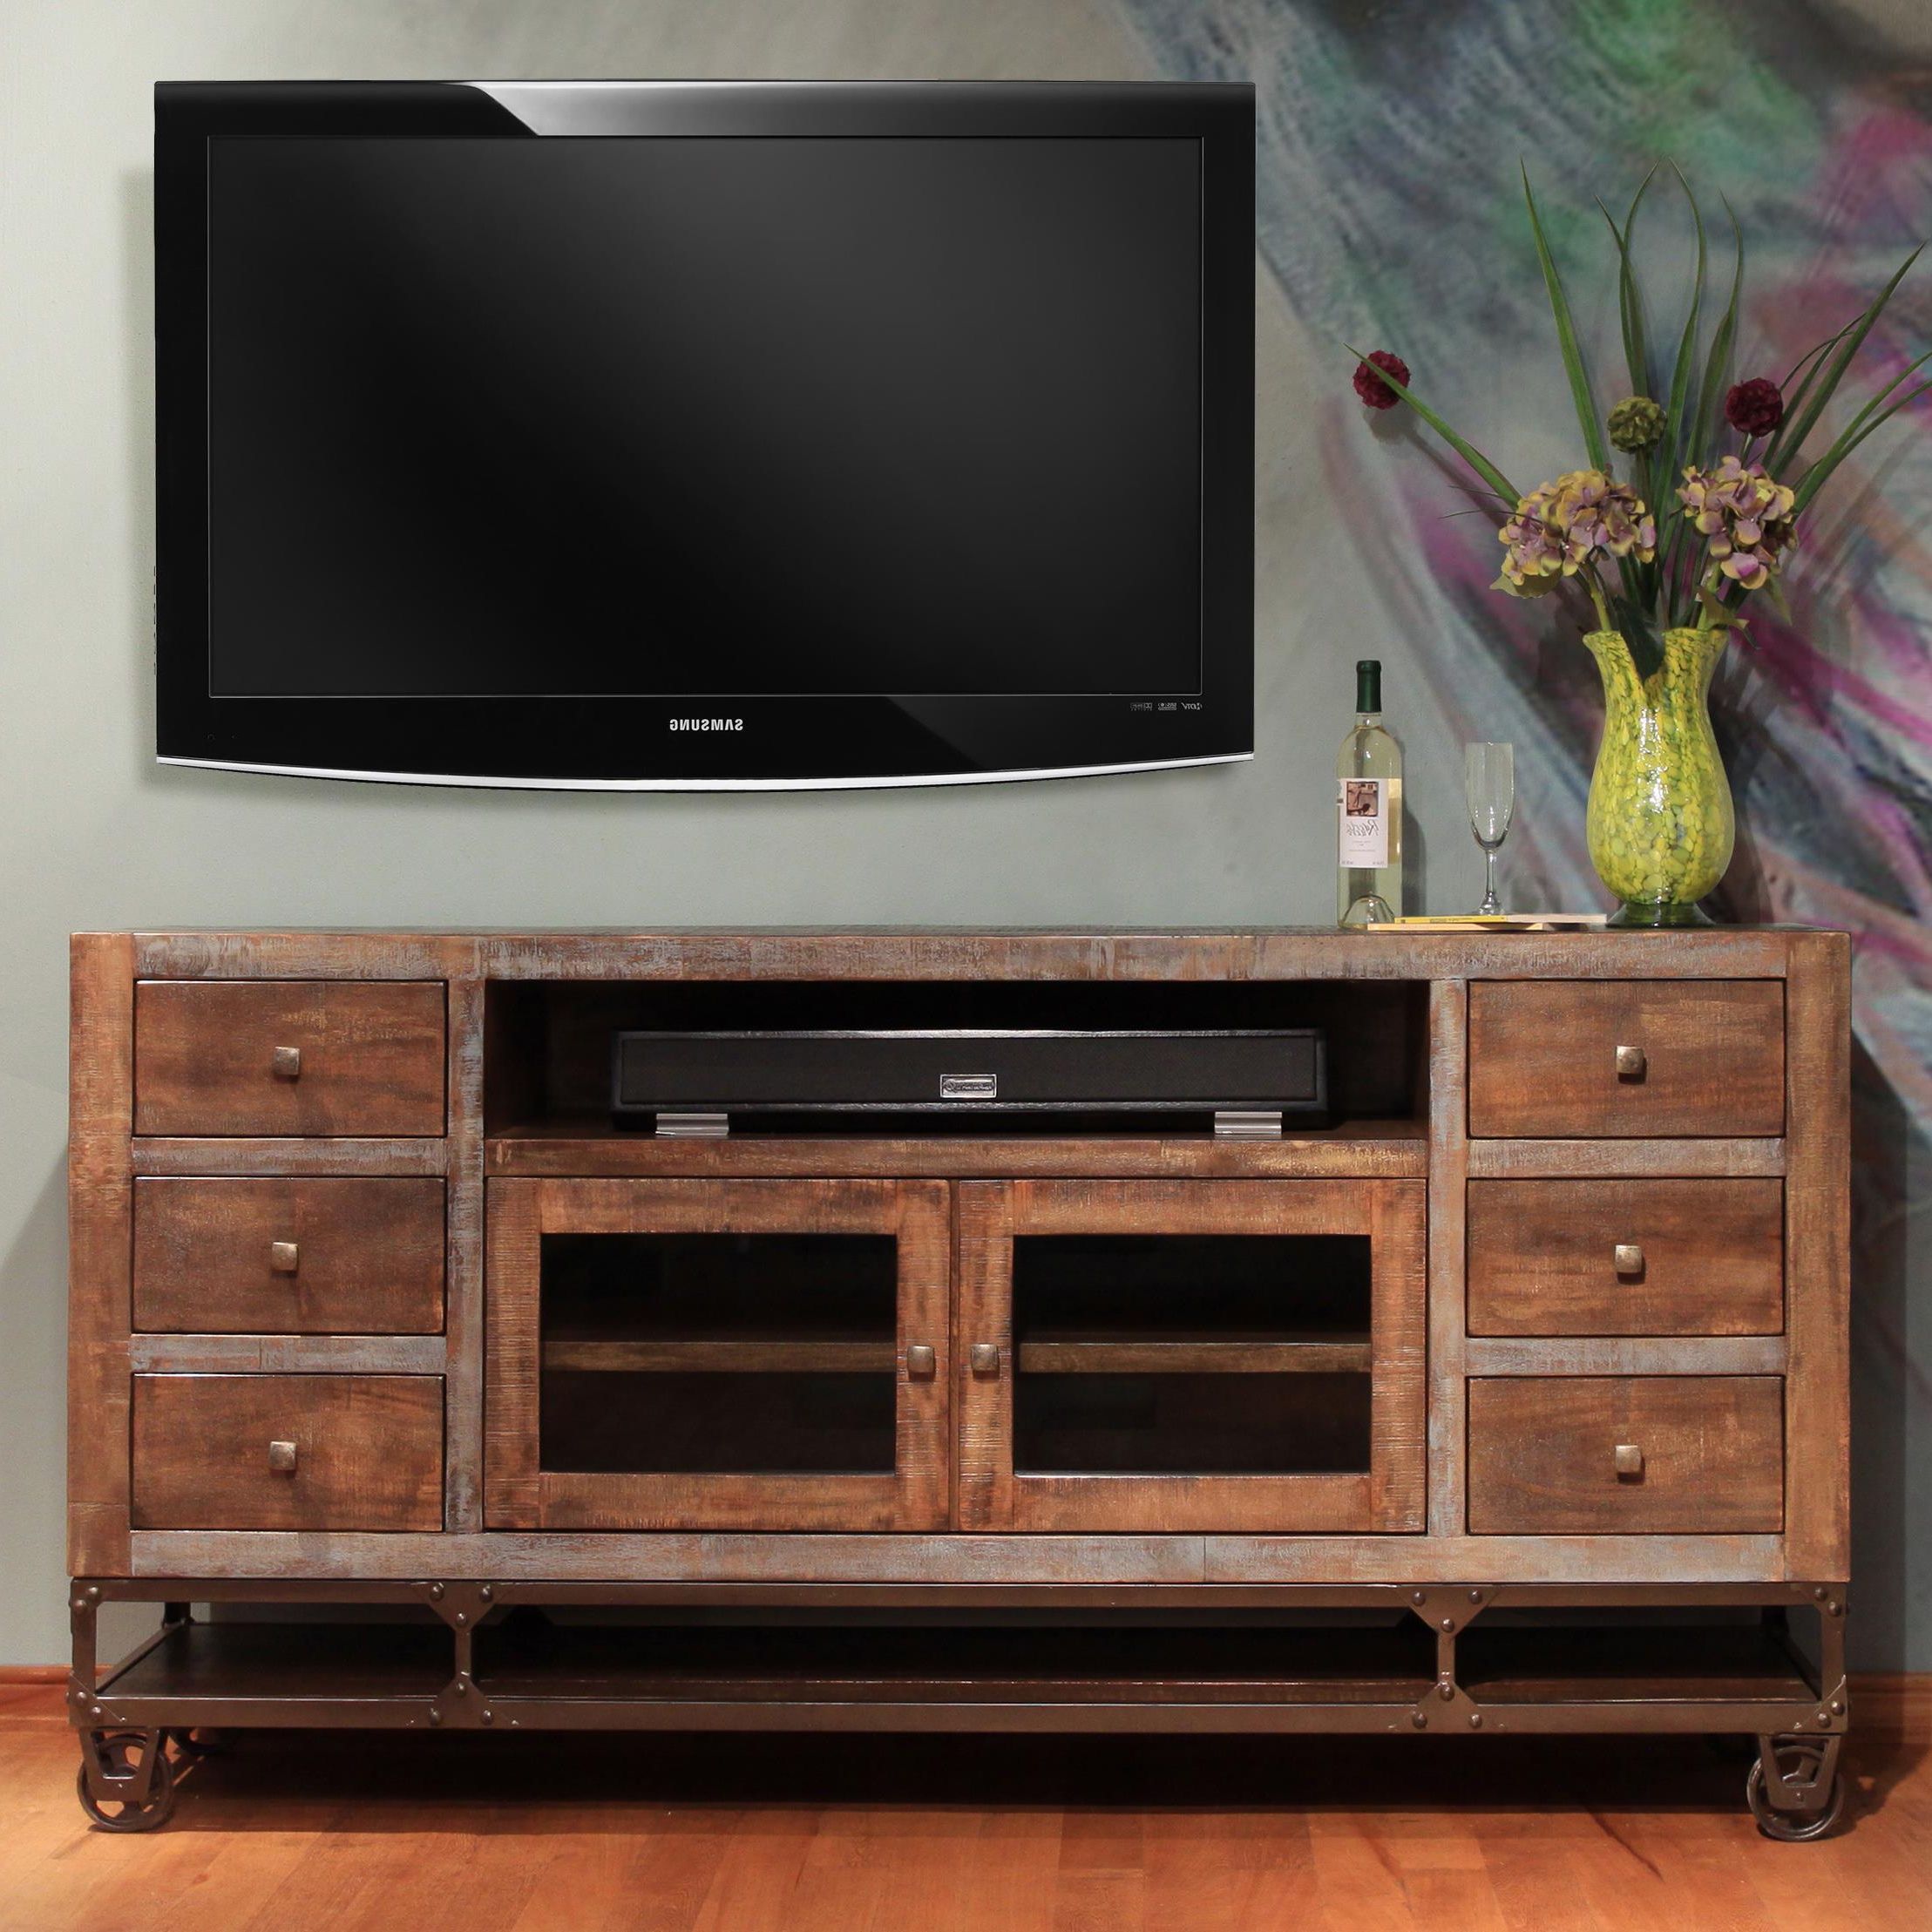 Artisan Home Urban Gold 76" Solid Wood Tv Stand | Suburban Within Dillon Tv Stands Oak (View 2 of 20)